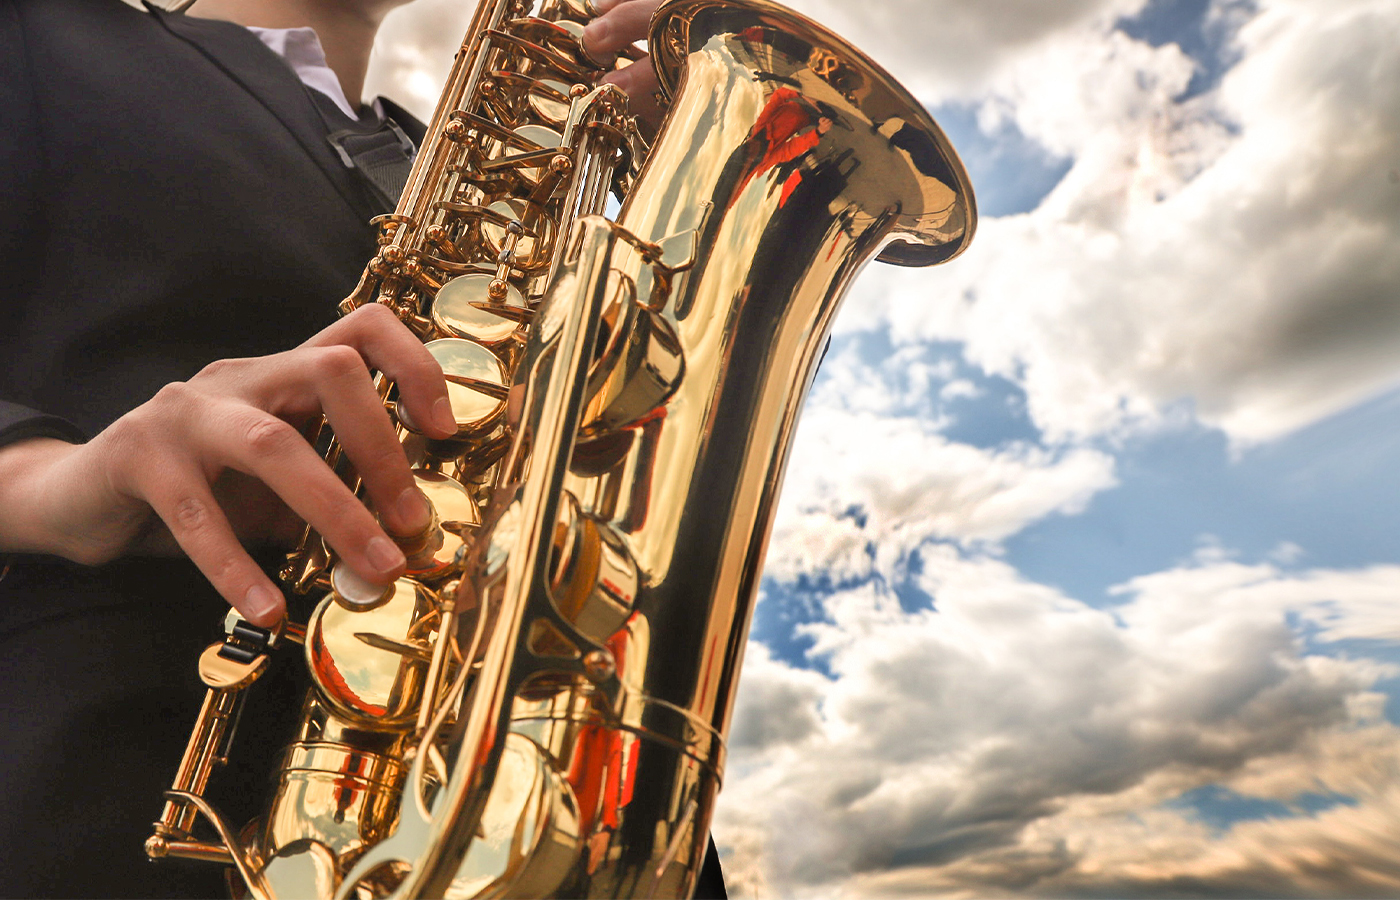 Live Music on the Patio with Okanagan Sax – FREE Admission!